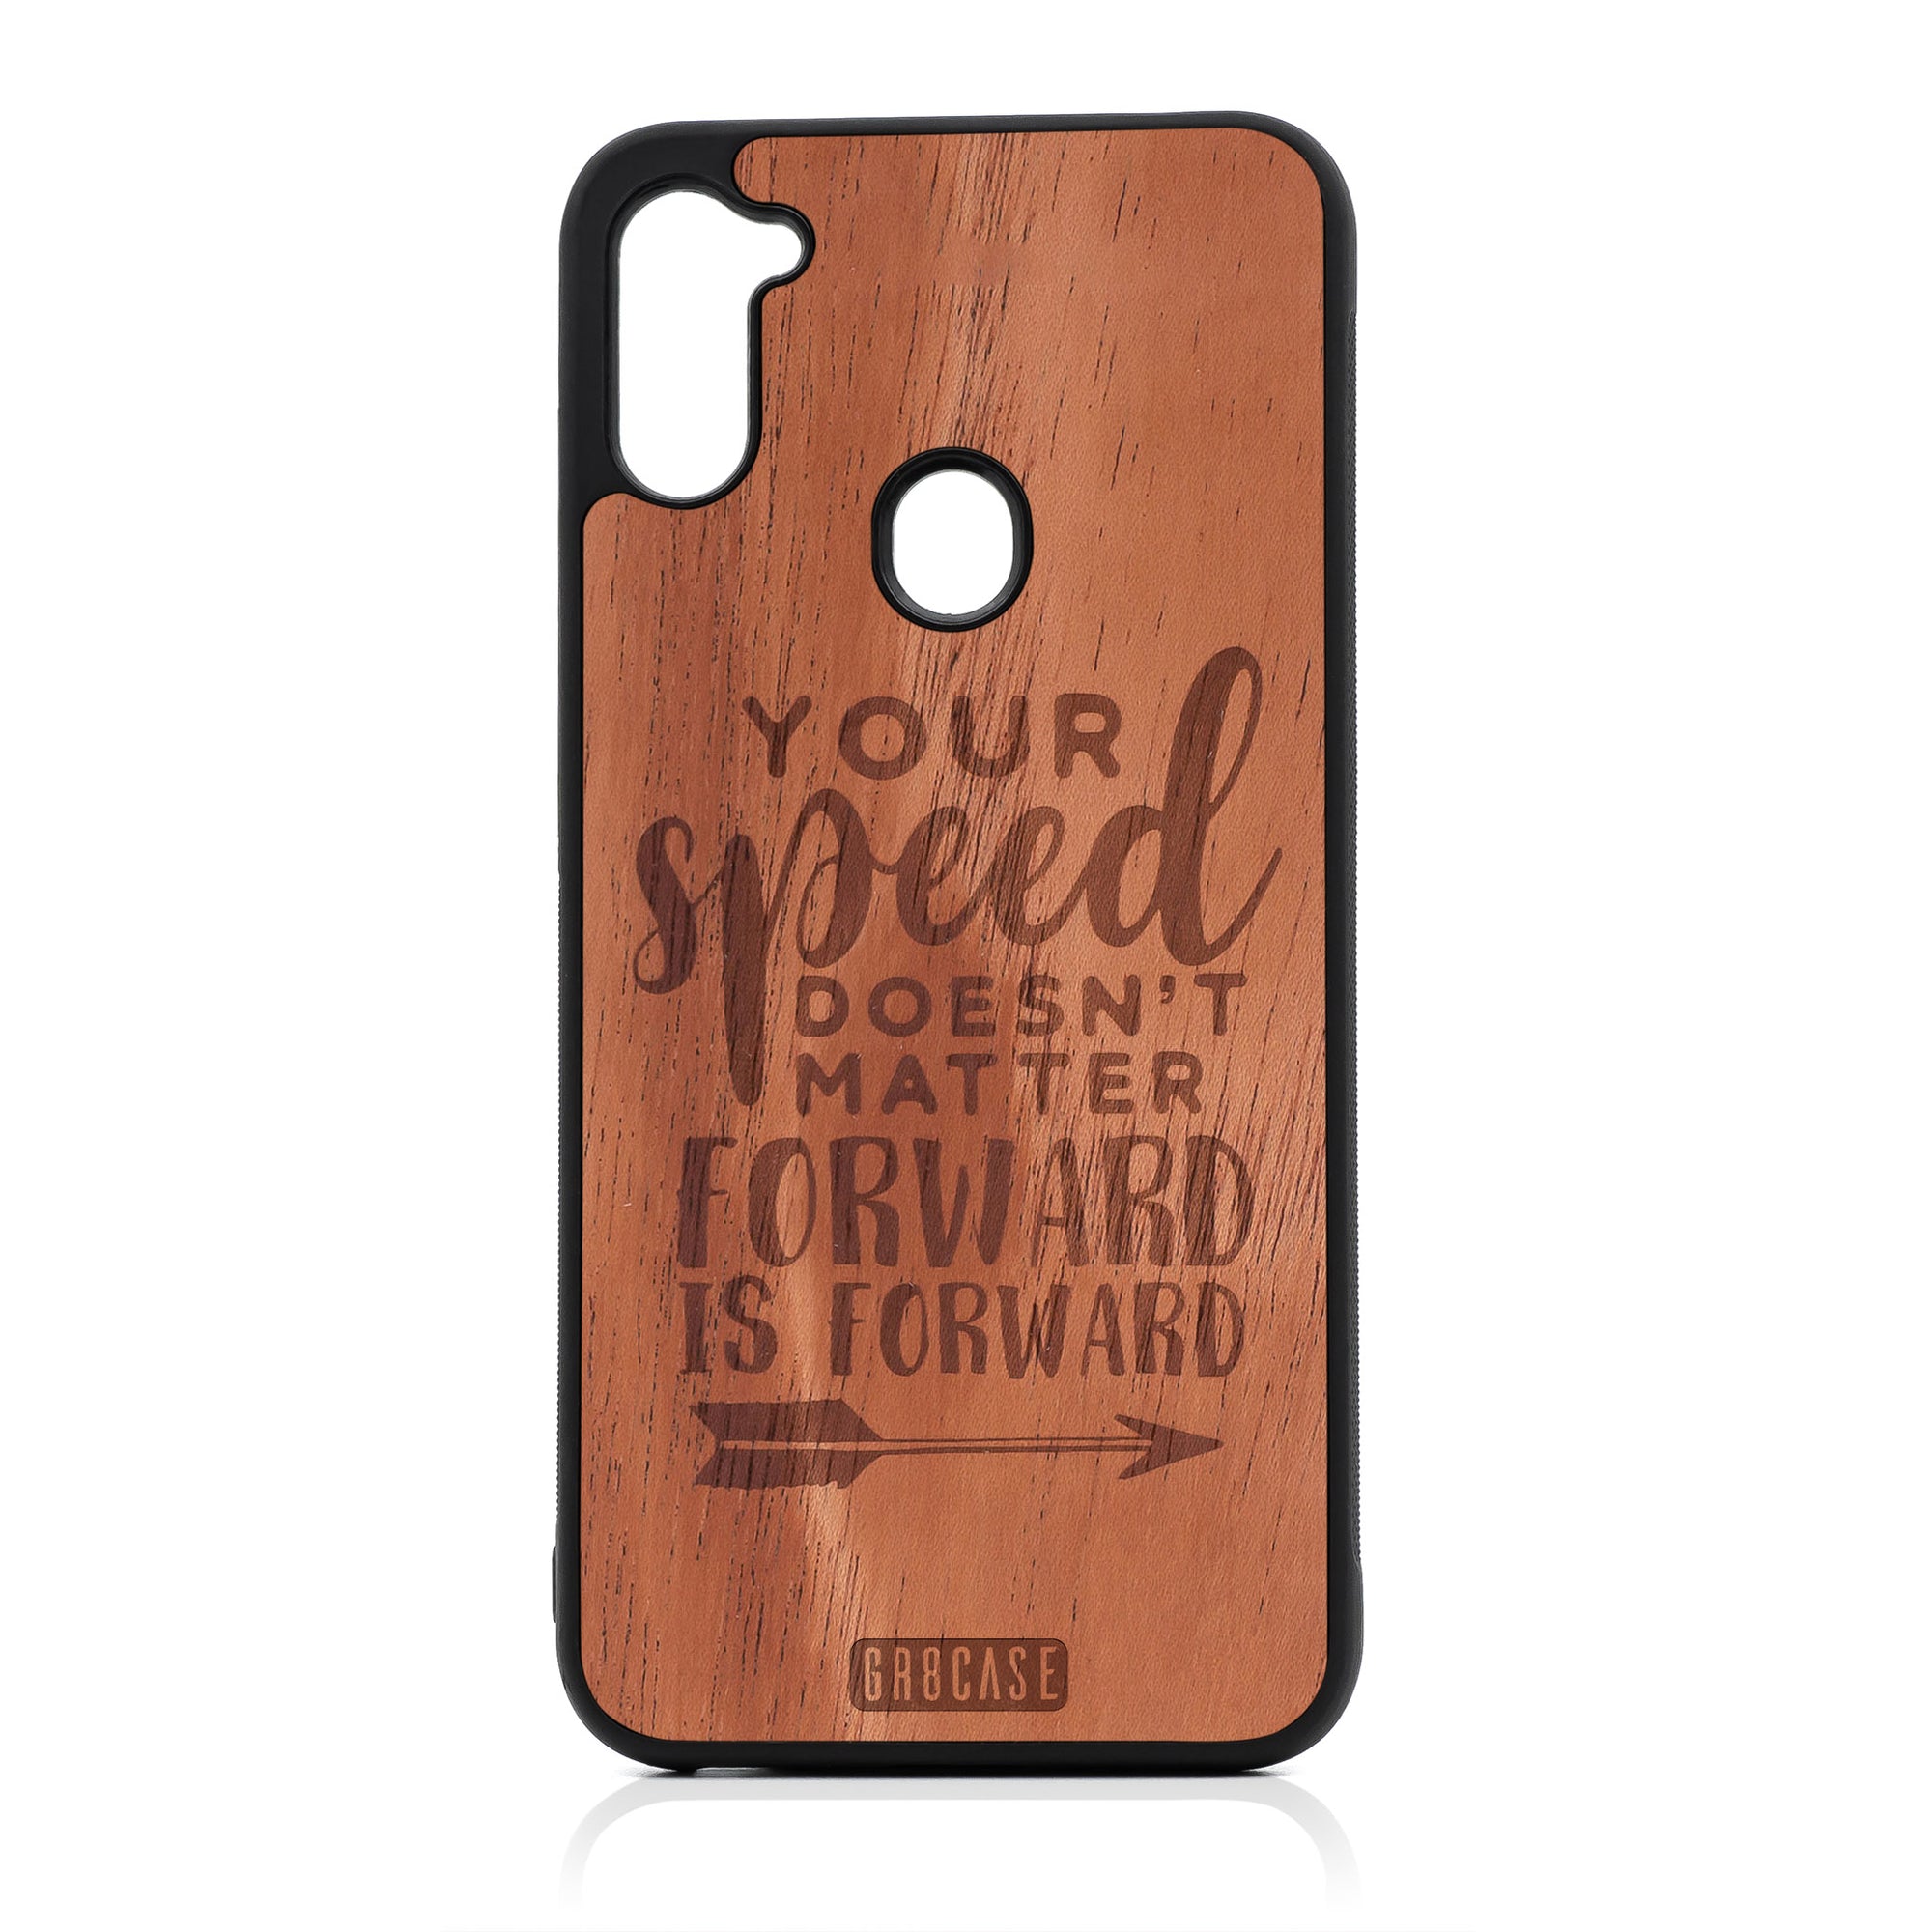 Your Speed Doesn't Matter Forward Is Forward Design Wood Case For Samsung Galaxy A11